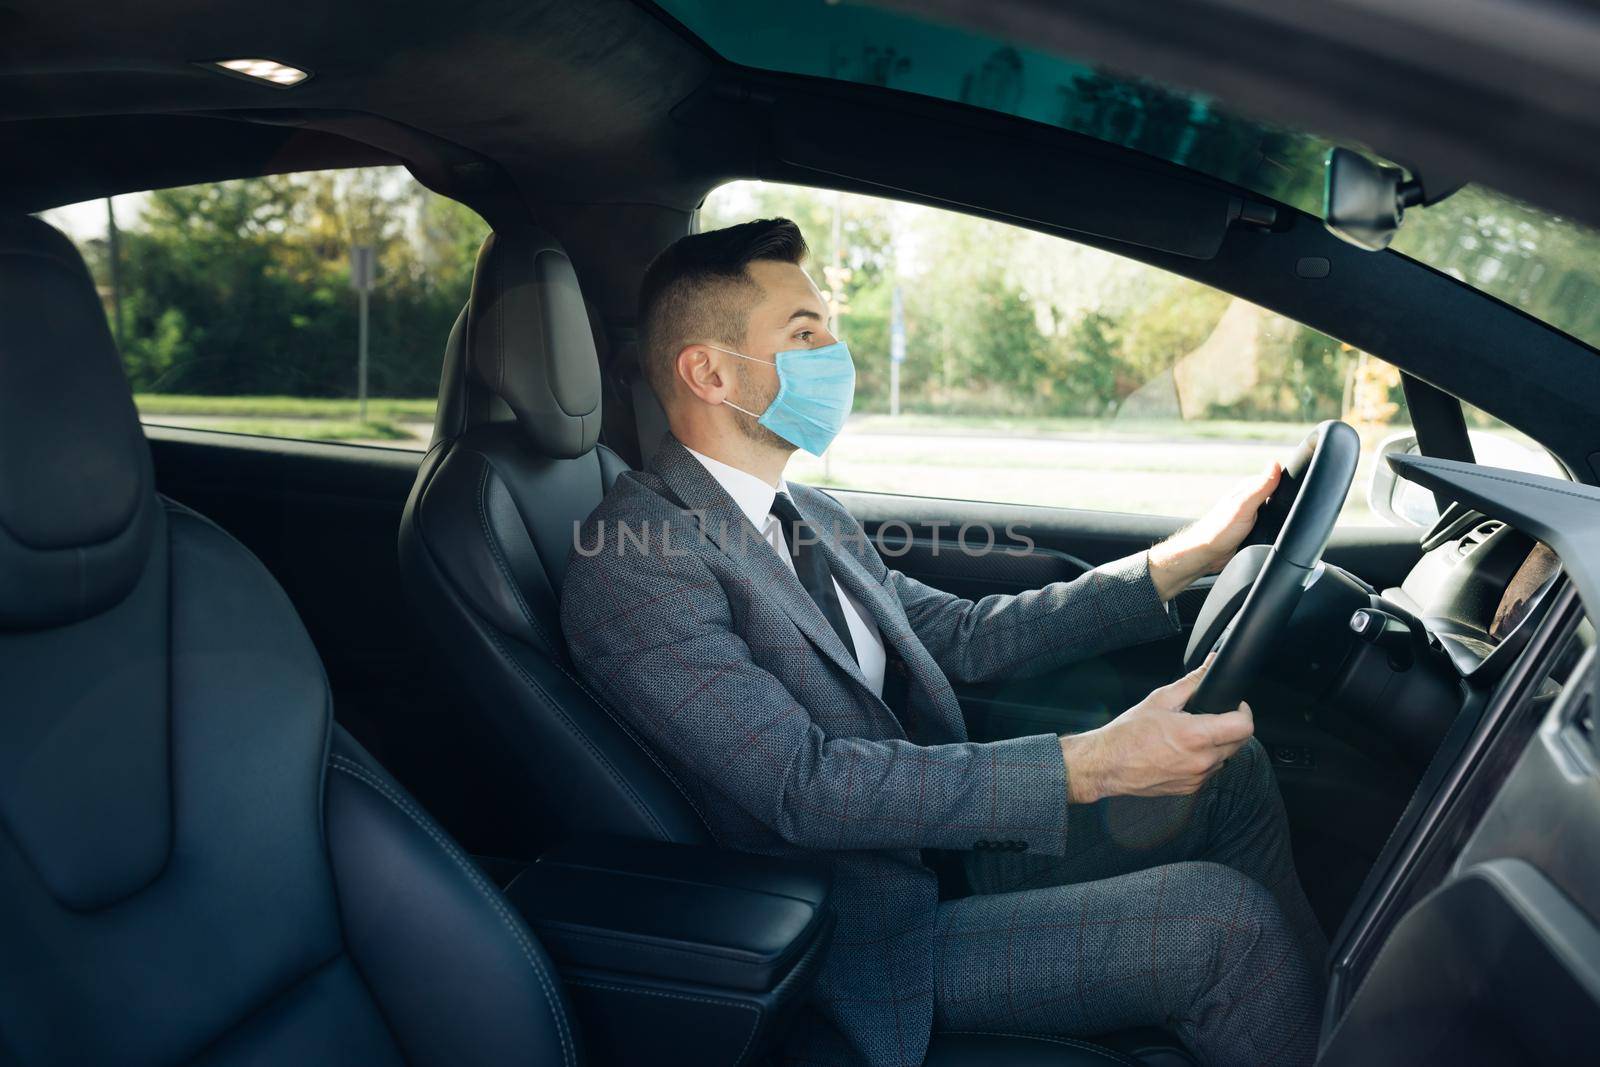 Pandemic. Citizens. Lockdown safety. Adult businessman wearing medical mask in prevention for coronavirus and driving his car to work. Businessman healthcare.